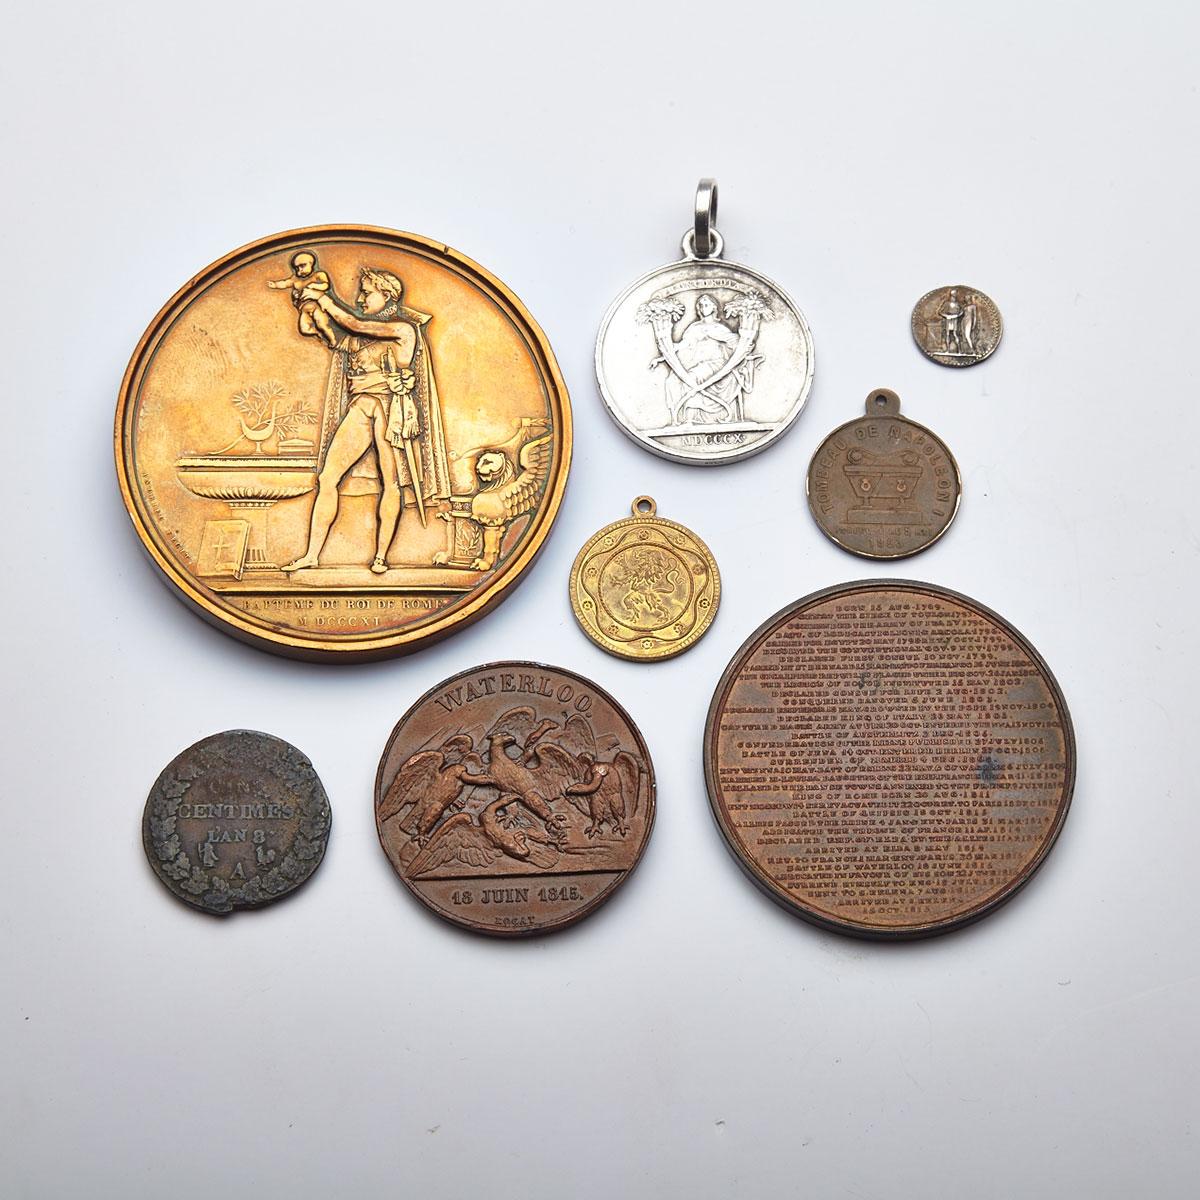 Eight Napoleonic Medallions and Coins, 19th century